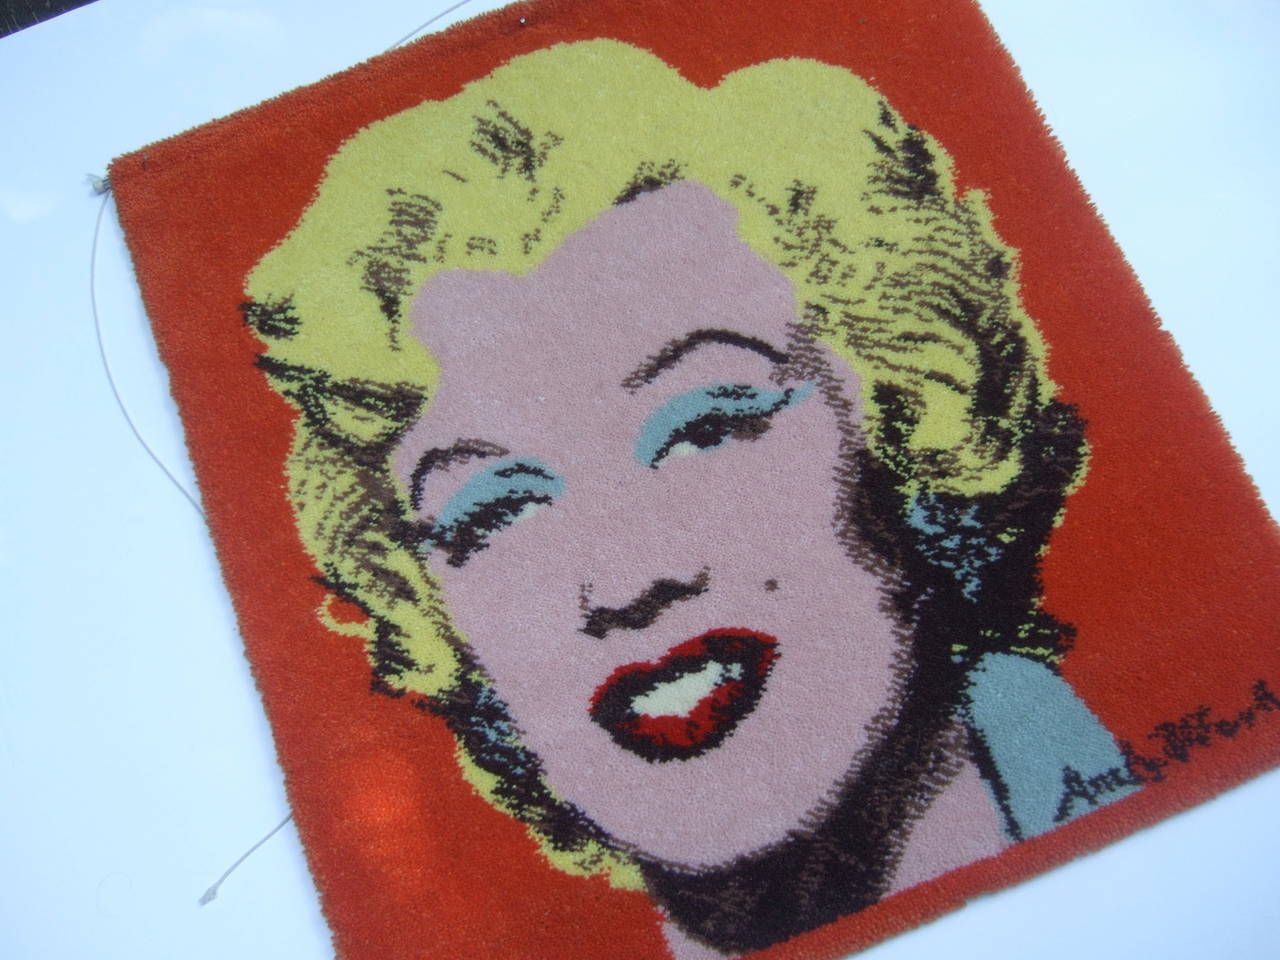 Andy Warhol's Marilyn Monroe replica hook knit wall hanging c 1970s
The iconic image is a replica of Warhol's series of Marilyn Monroe
silk screen images

The machine made hook knit rug is designed with Marilyn Monroe's
iconic image. The wall